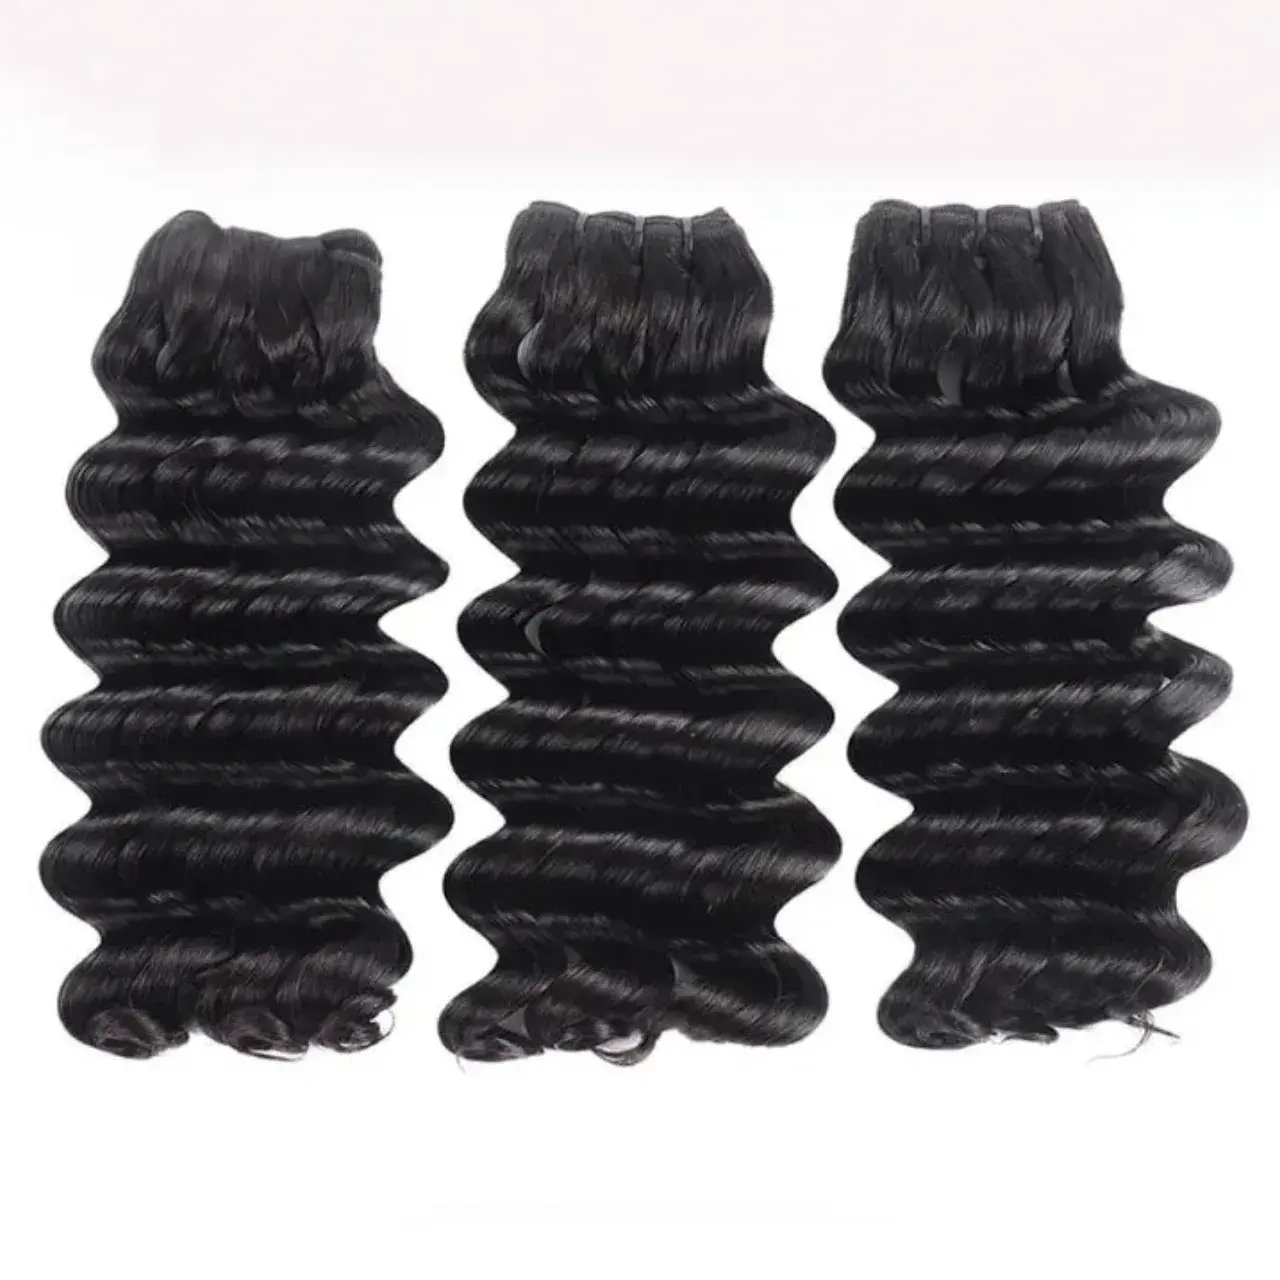 Volume Stock All Over The World Customer,Best Highly Quality With Raw Hair Deep Wave Luxury Hair Weaving